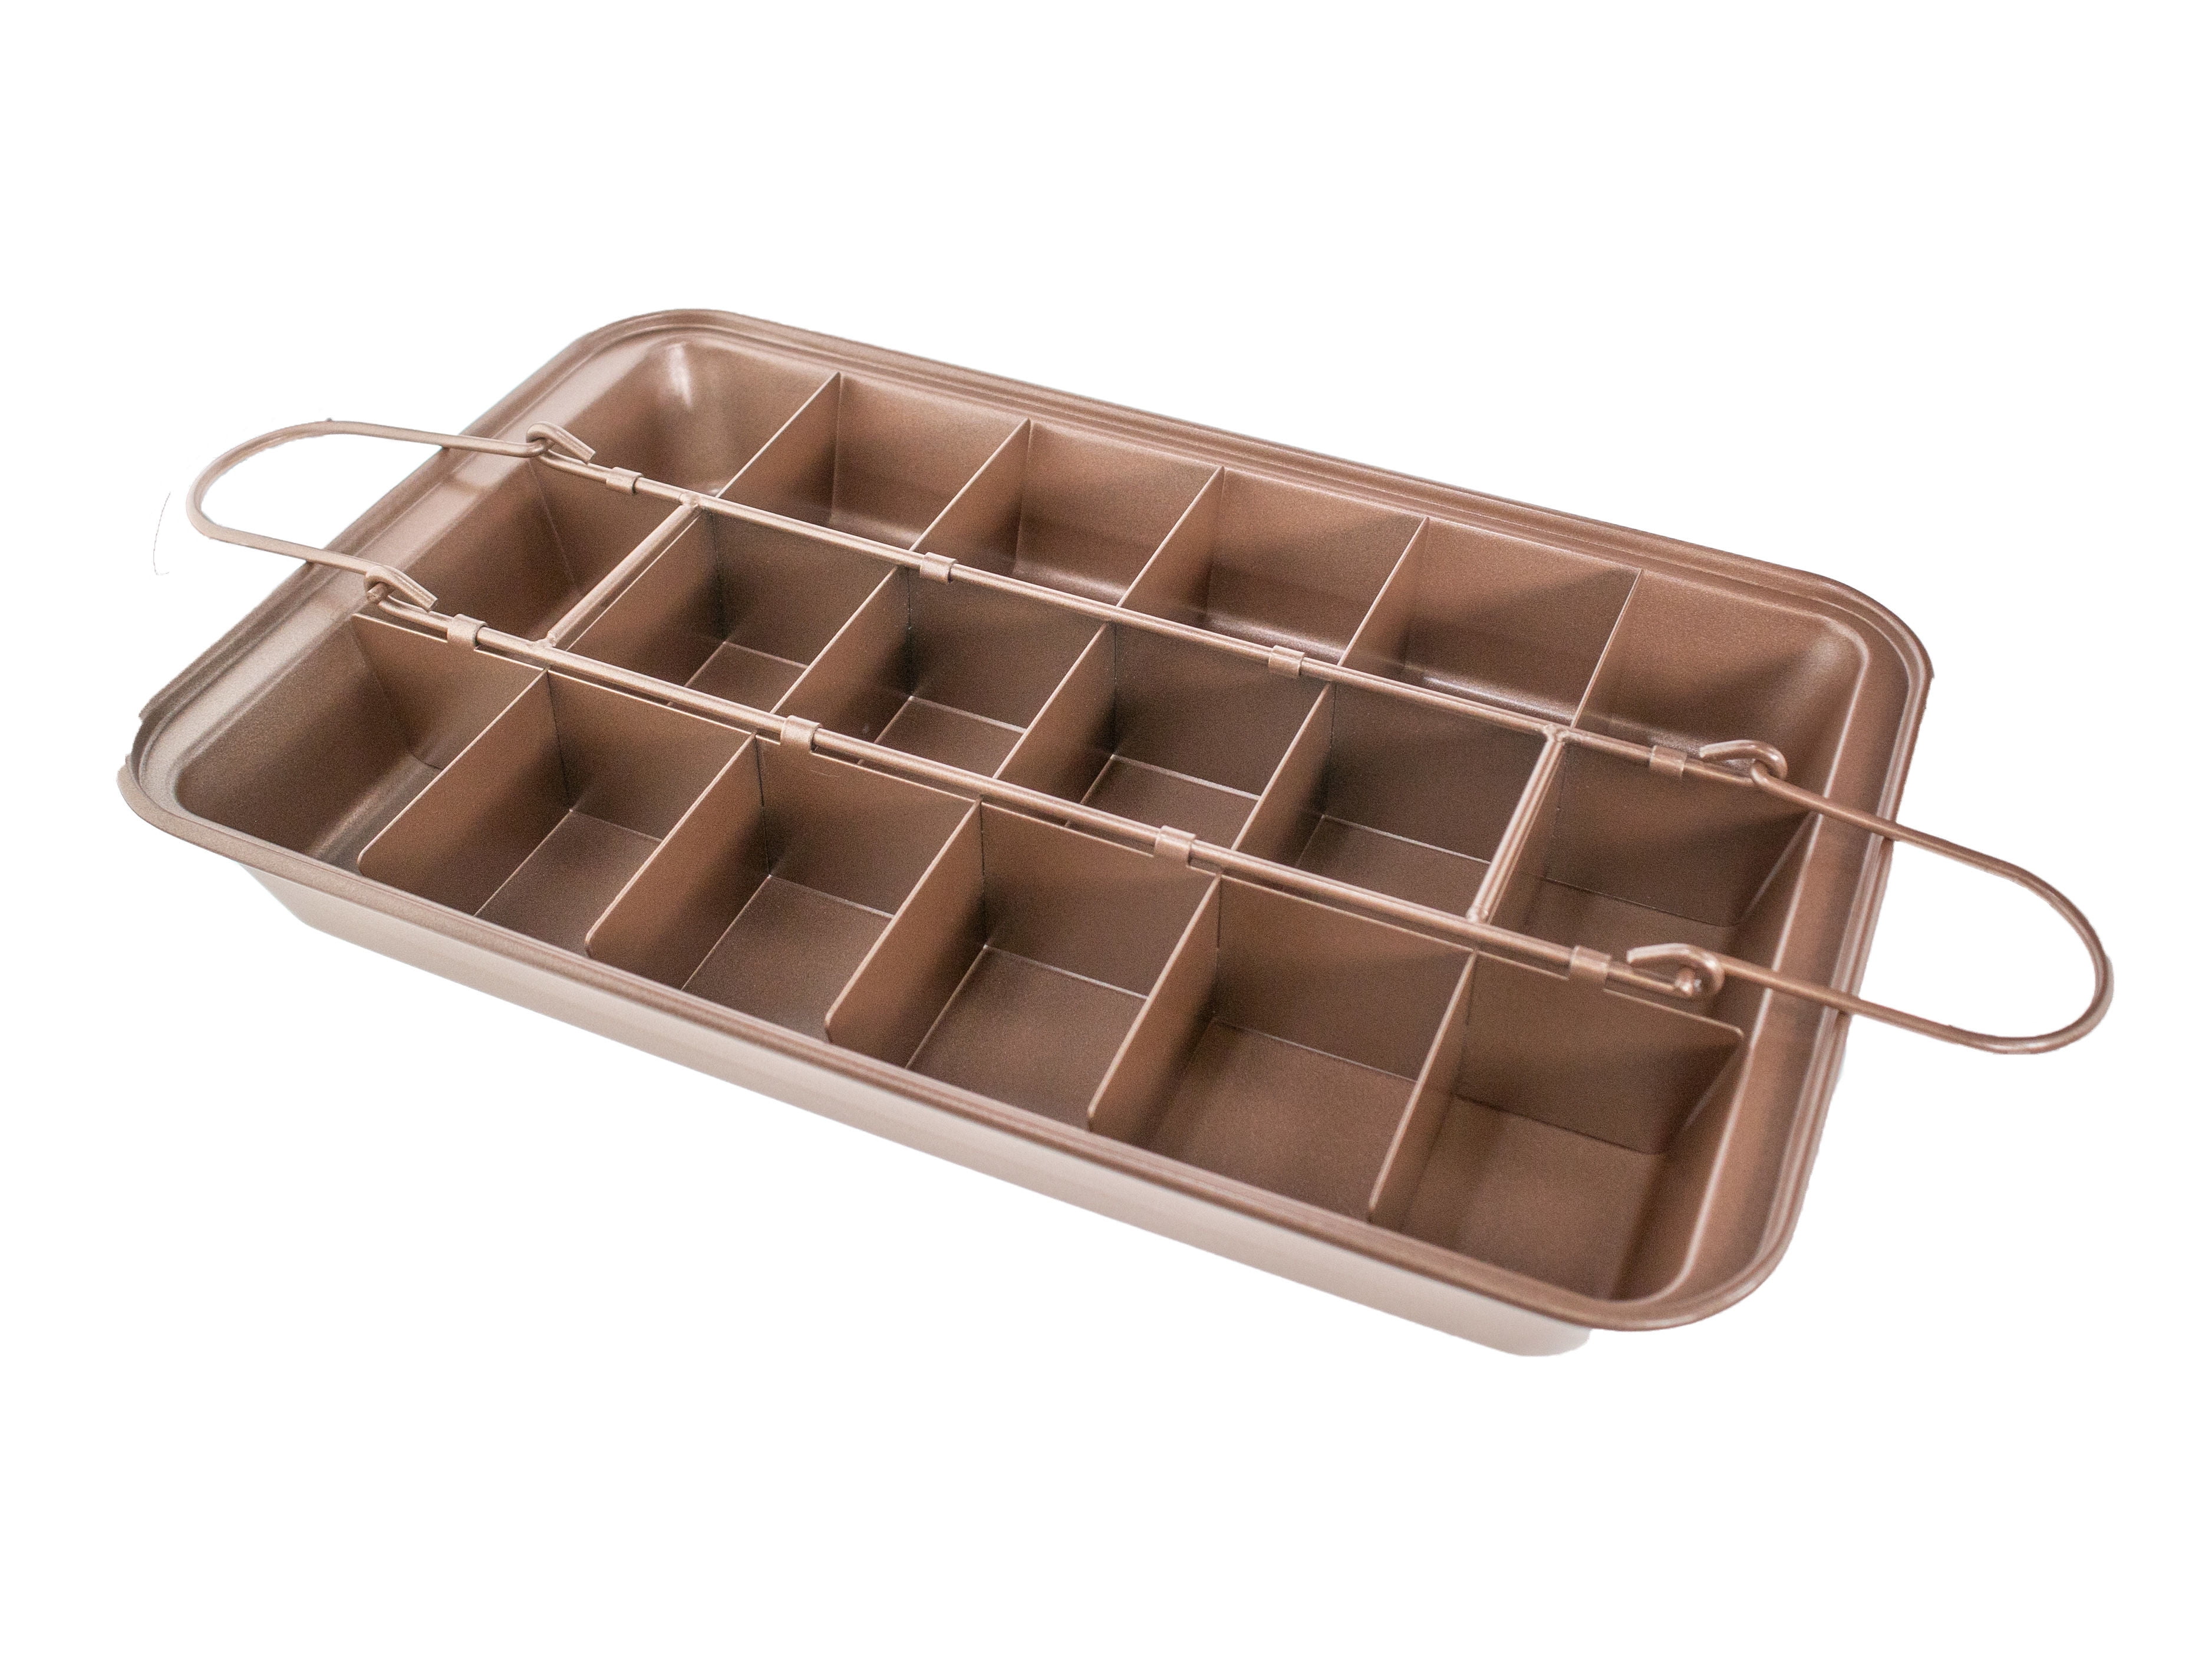 Brownie Pan with Dividers, Divided Non Stick Edge Brownie Pans with Grips  Slice, Bakeware Cutter Tray Molds Square Cake Fudge Pan with Built-in  Slicer lid for All Oven Baking, 12X8 Inch 